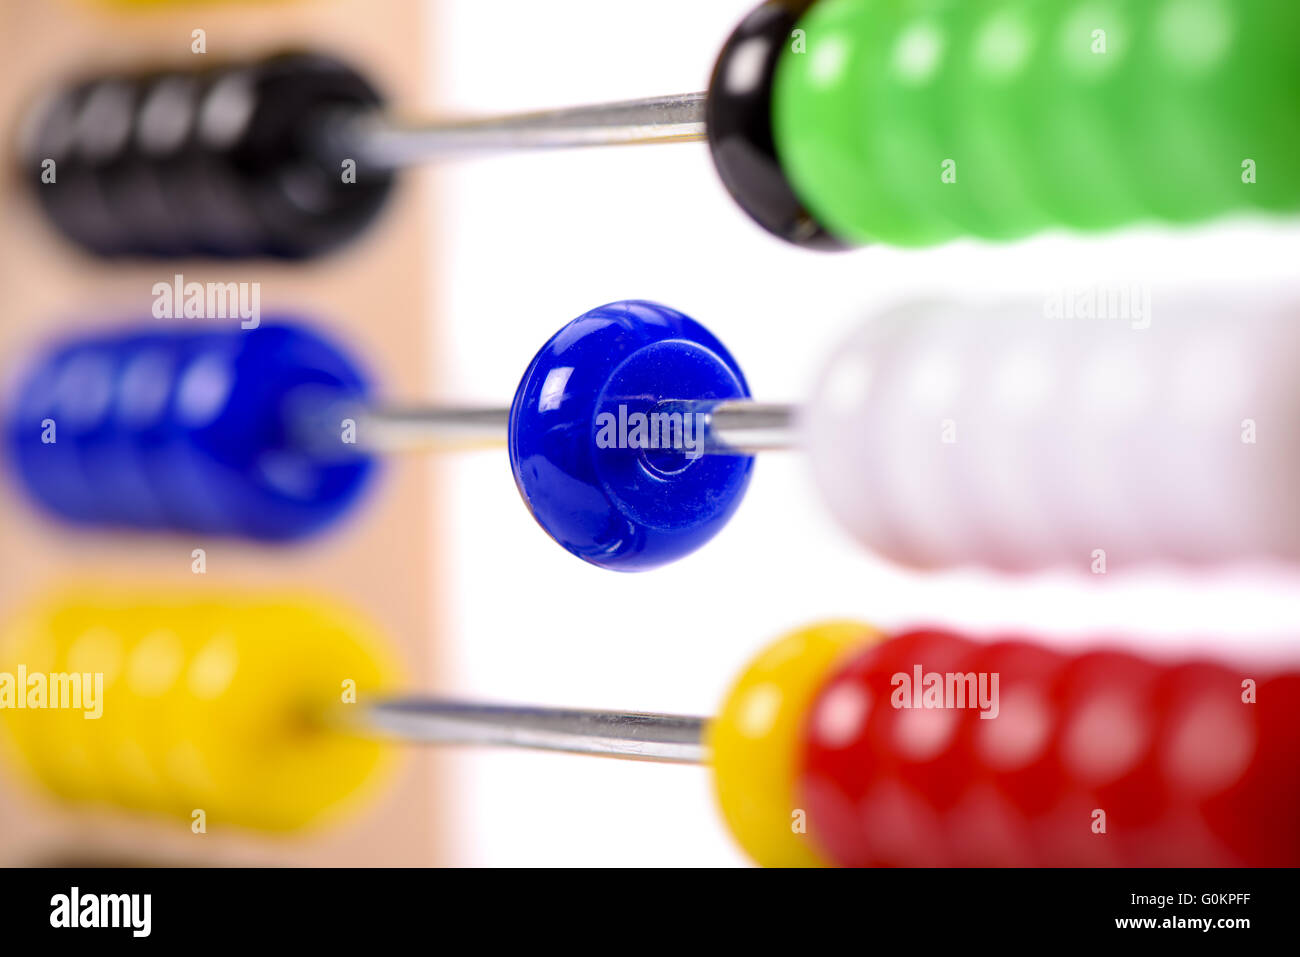 abacus counter in detail and isolated over white Stock Photo